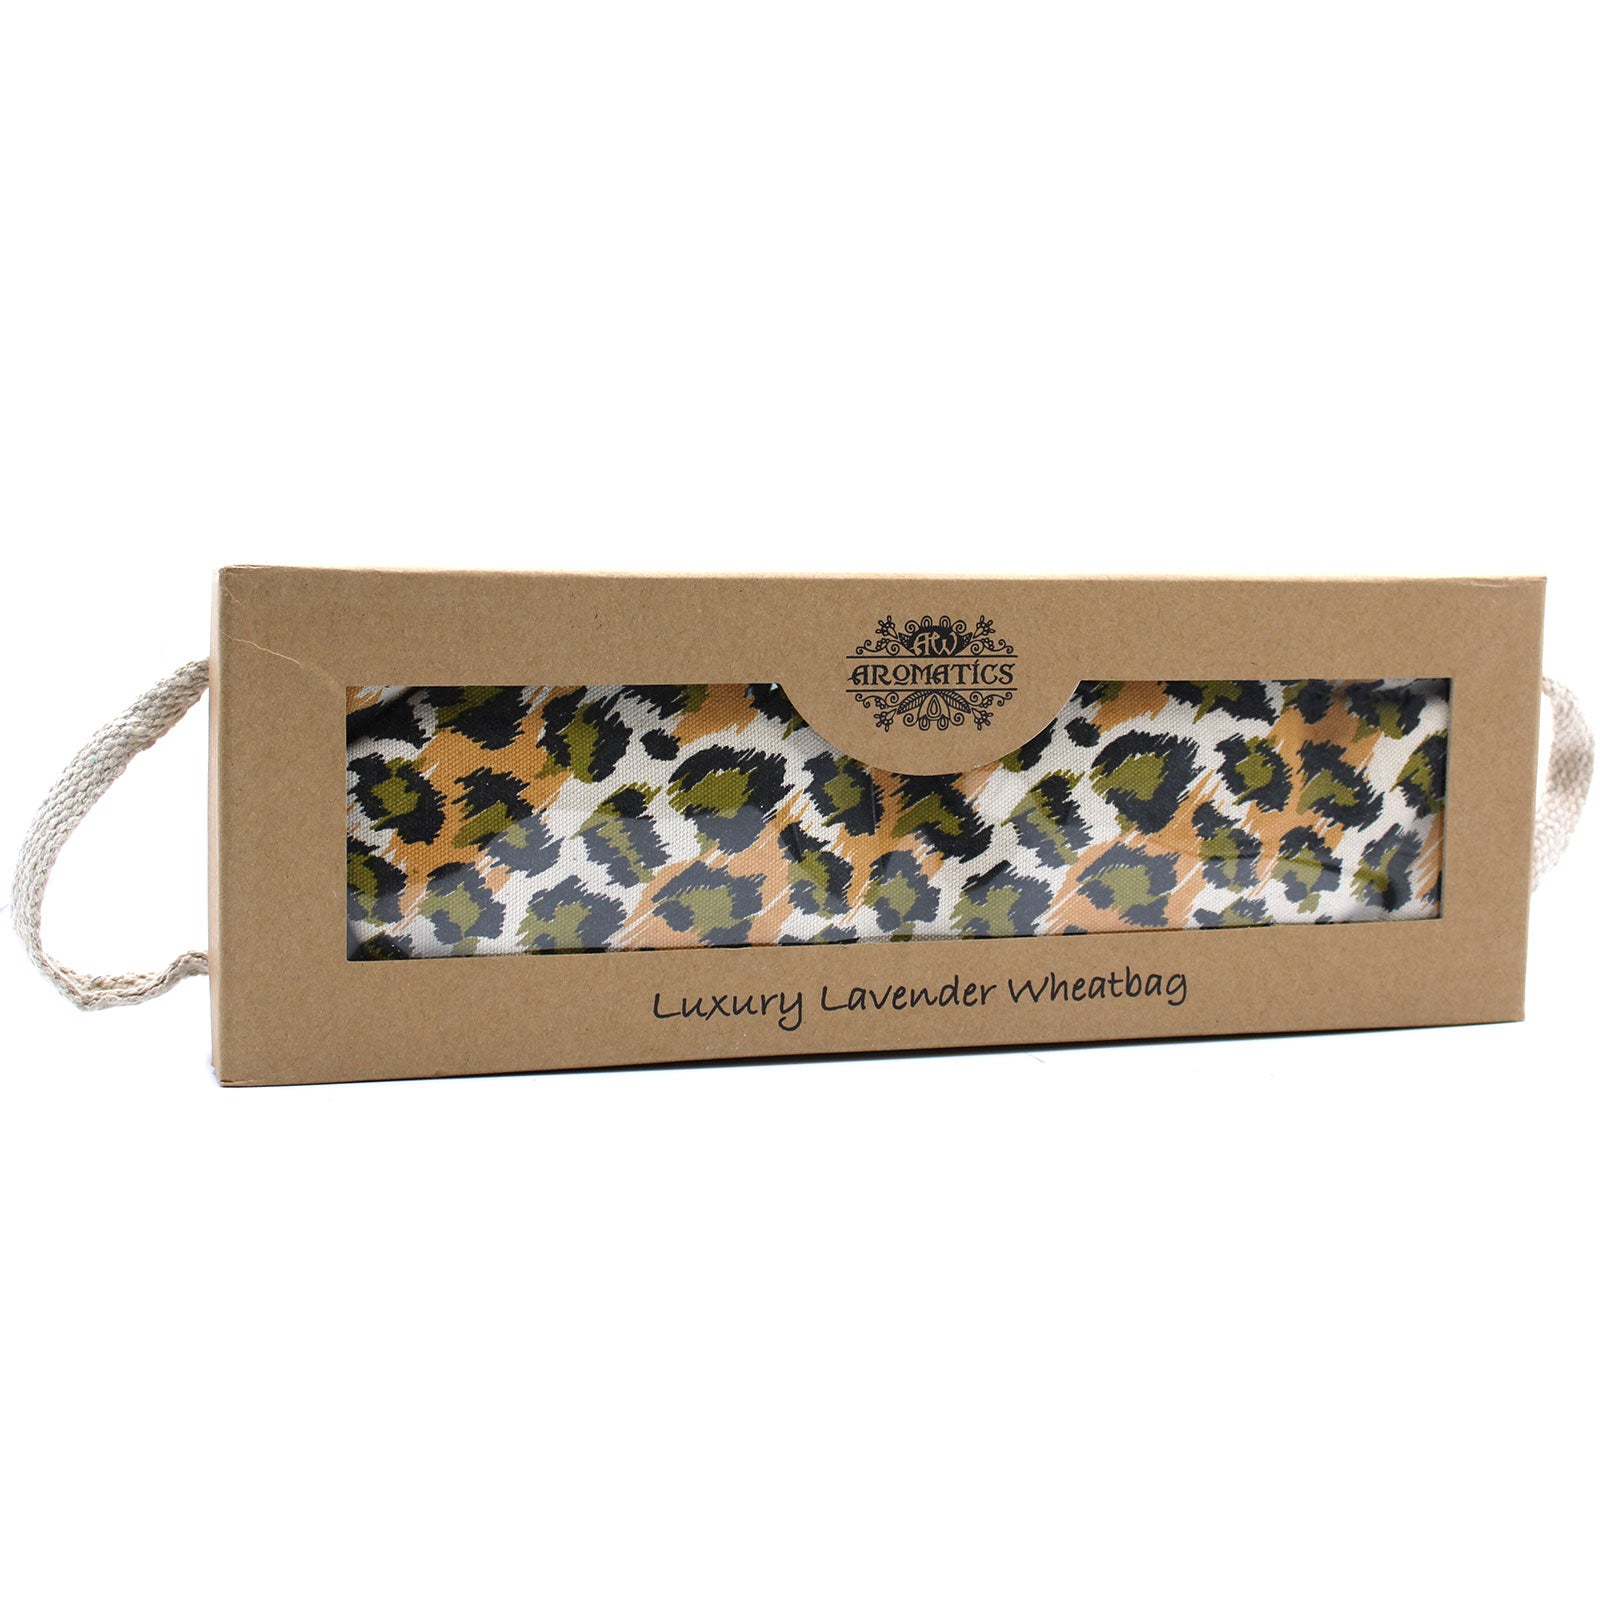 View Luxury Lavender Wheat Bag in Gift Box Night Leopard information